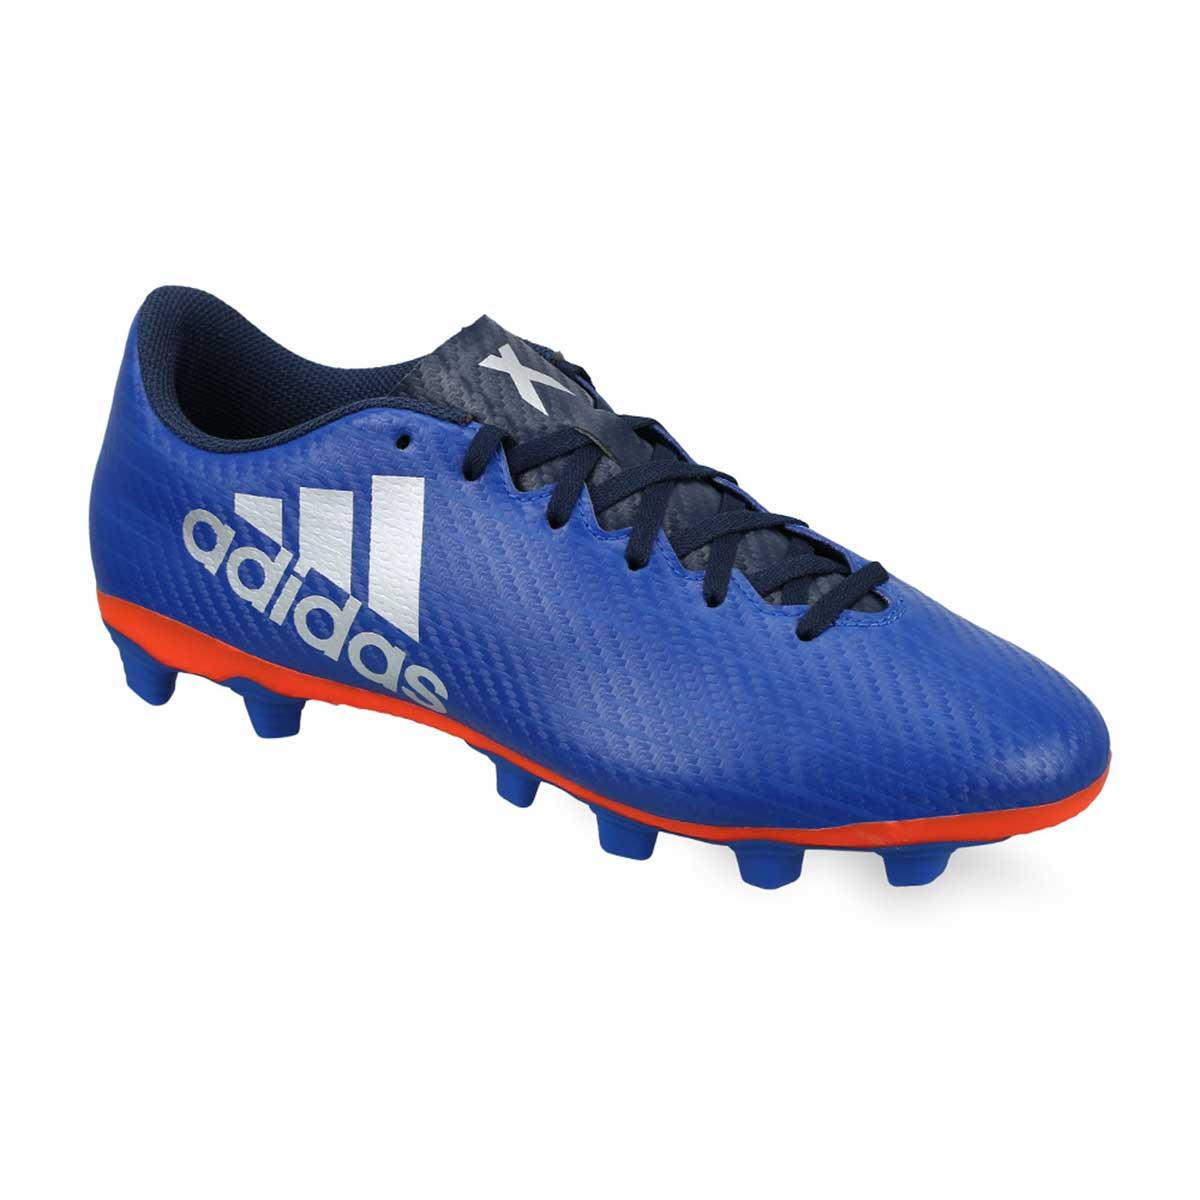 Buy Adidas X 16.4 FXG Football Shoes (Royal/Silver/Red) Online